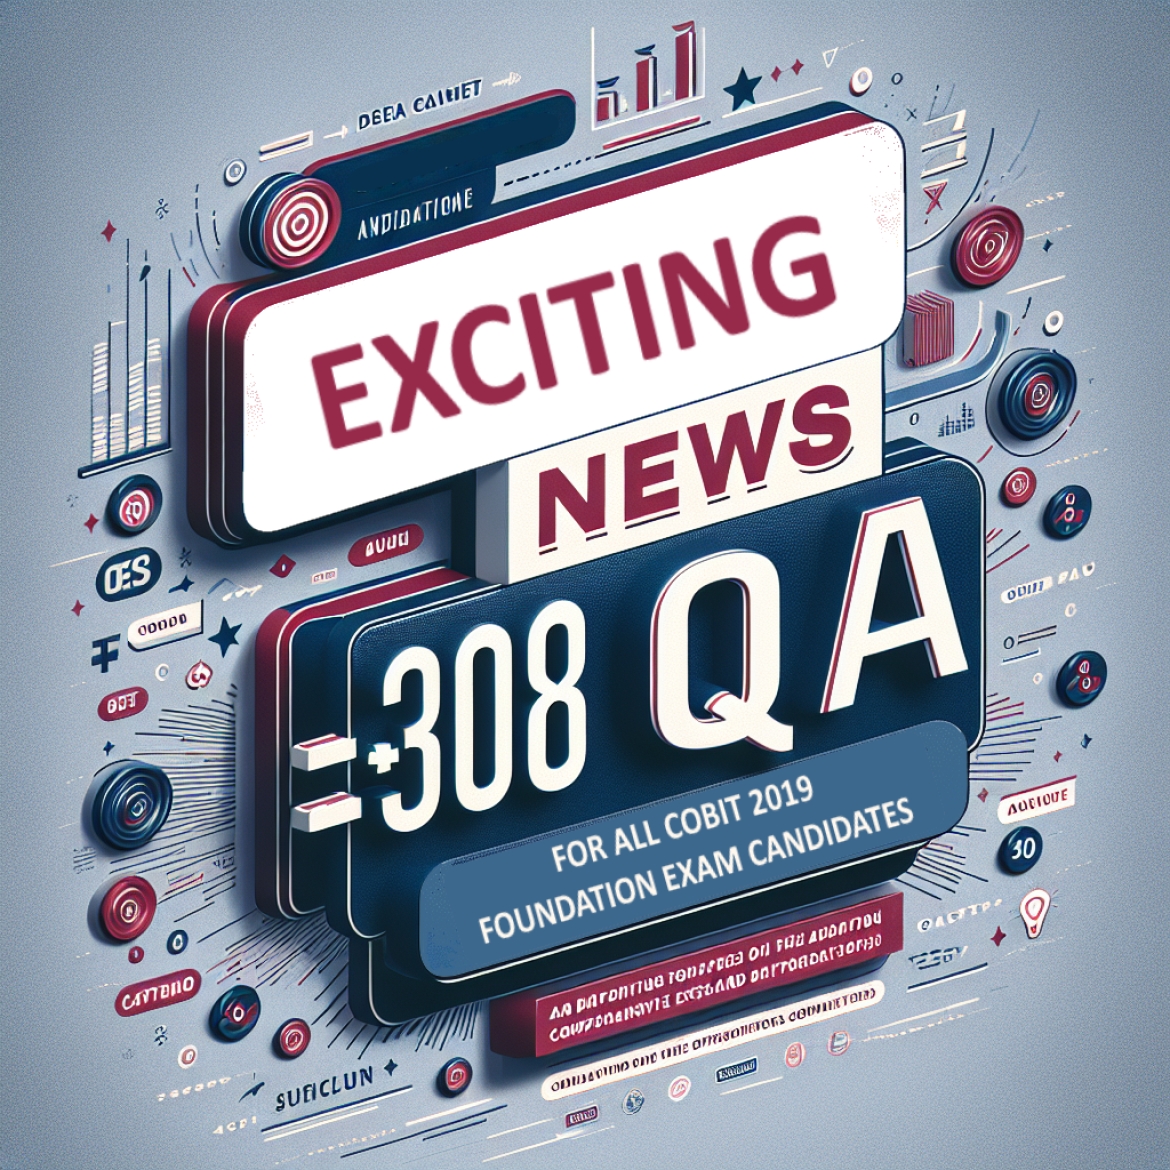 Exciting news +308 Q&A for all COBIT 2019 Foundation exam candidates!